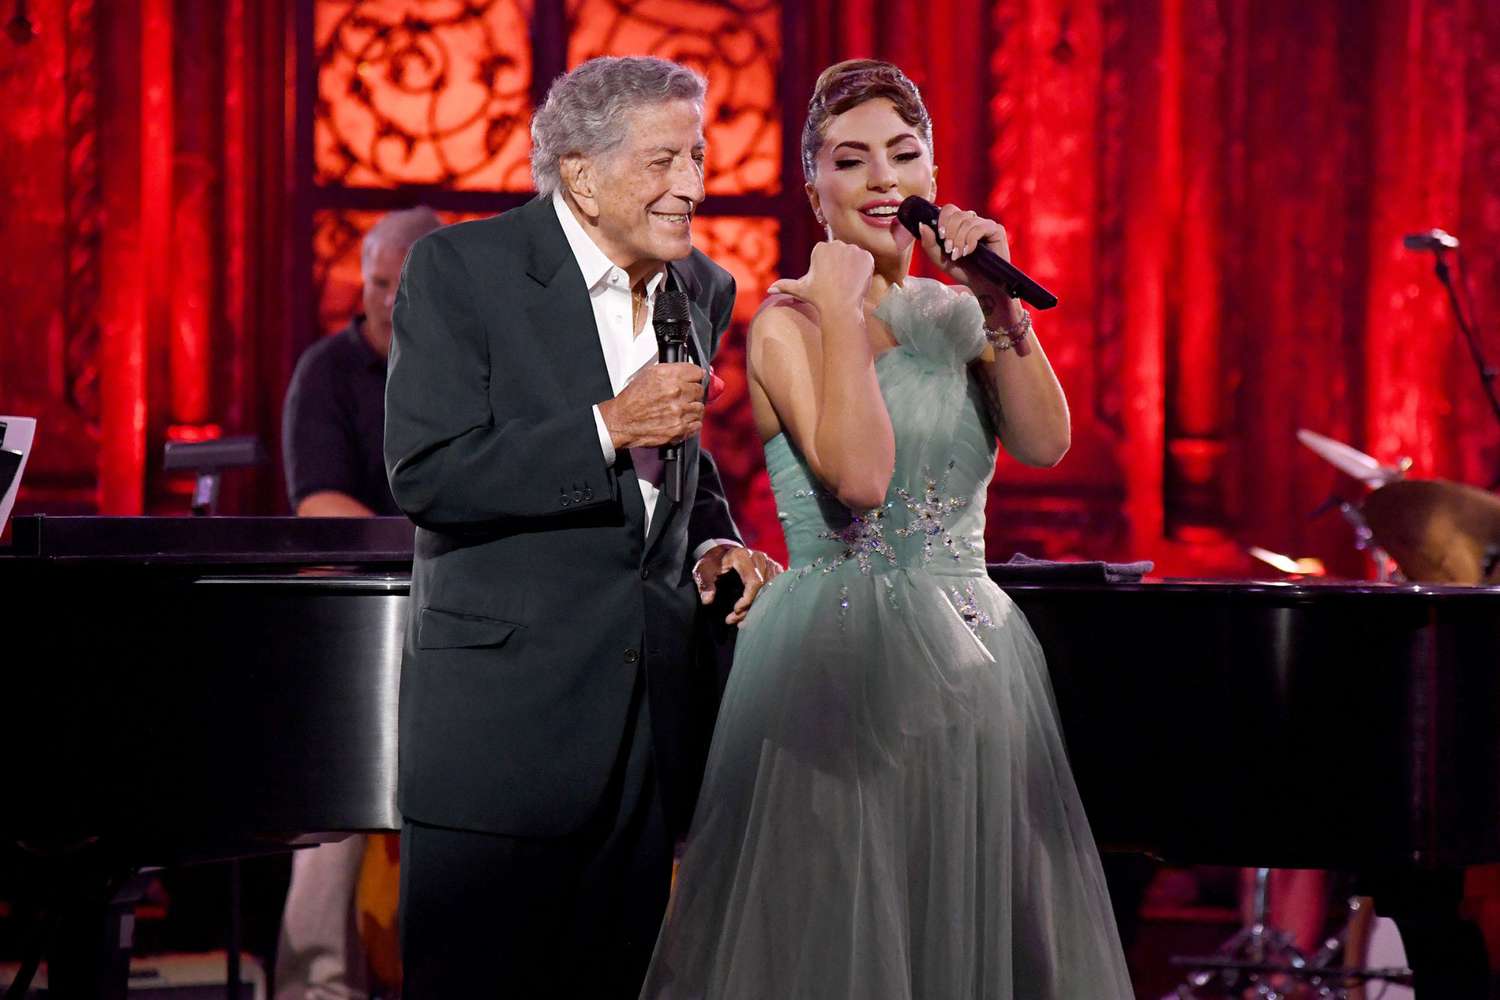 NEW YORK, NEW YORK - NOVEMBER 28: (Exclusive Coverage) In this image released on November 28, Tony Bennett and Lady Gaga perform on stage during MTV Unplugged: Tony Bennett & Lady Gaga at the Angel Orensanz Center in New York City. MTV Unplugged: Tony Bennett & Lady Gaga will air Thursday, Dec. 16, at 9 p.m. ET on MTV in the U.S. and across its global platforms. (Photo by Kevin Mazur/Getty Images for ViacomCBS)